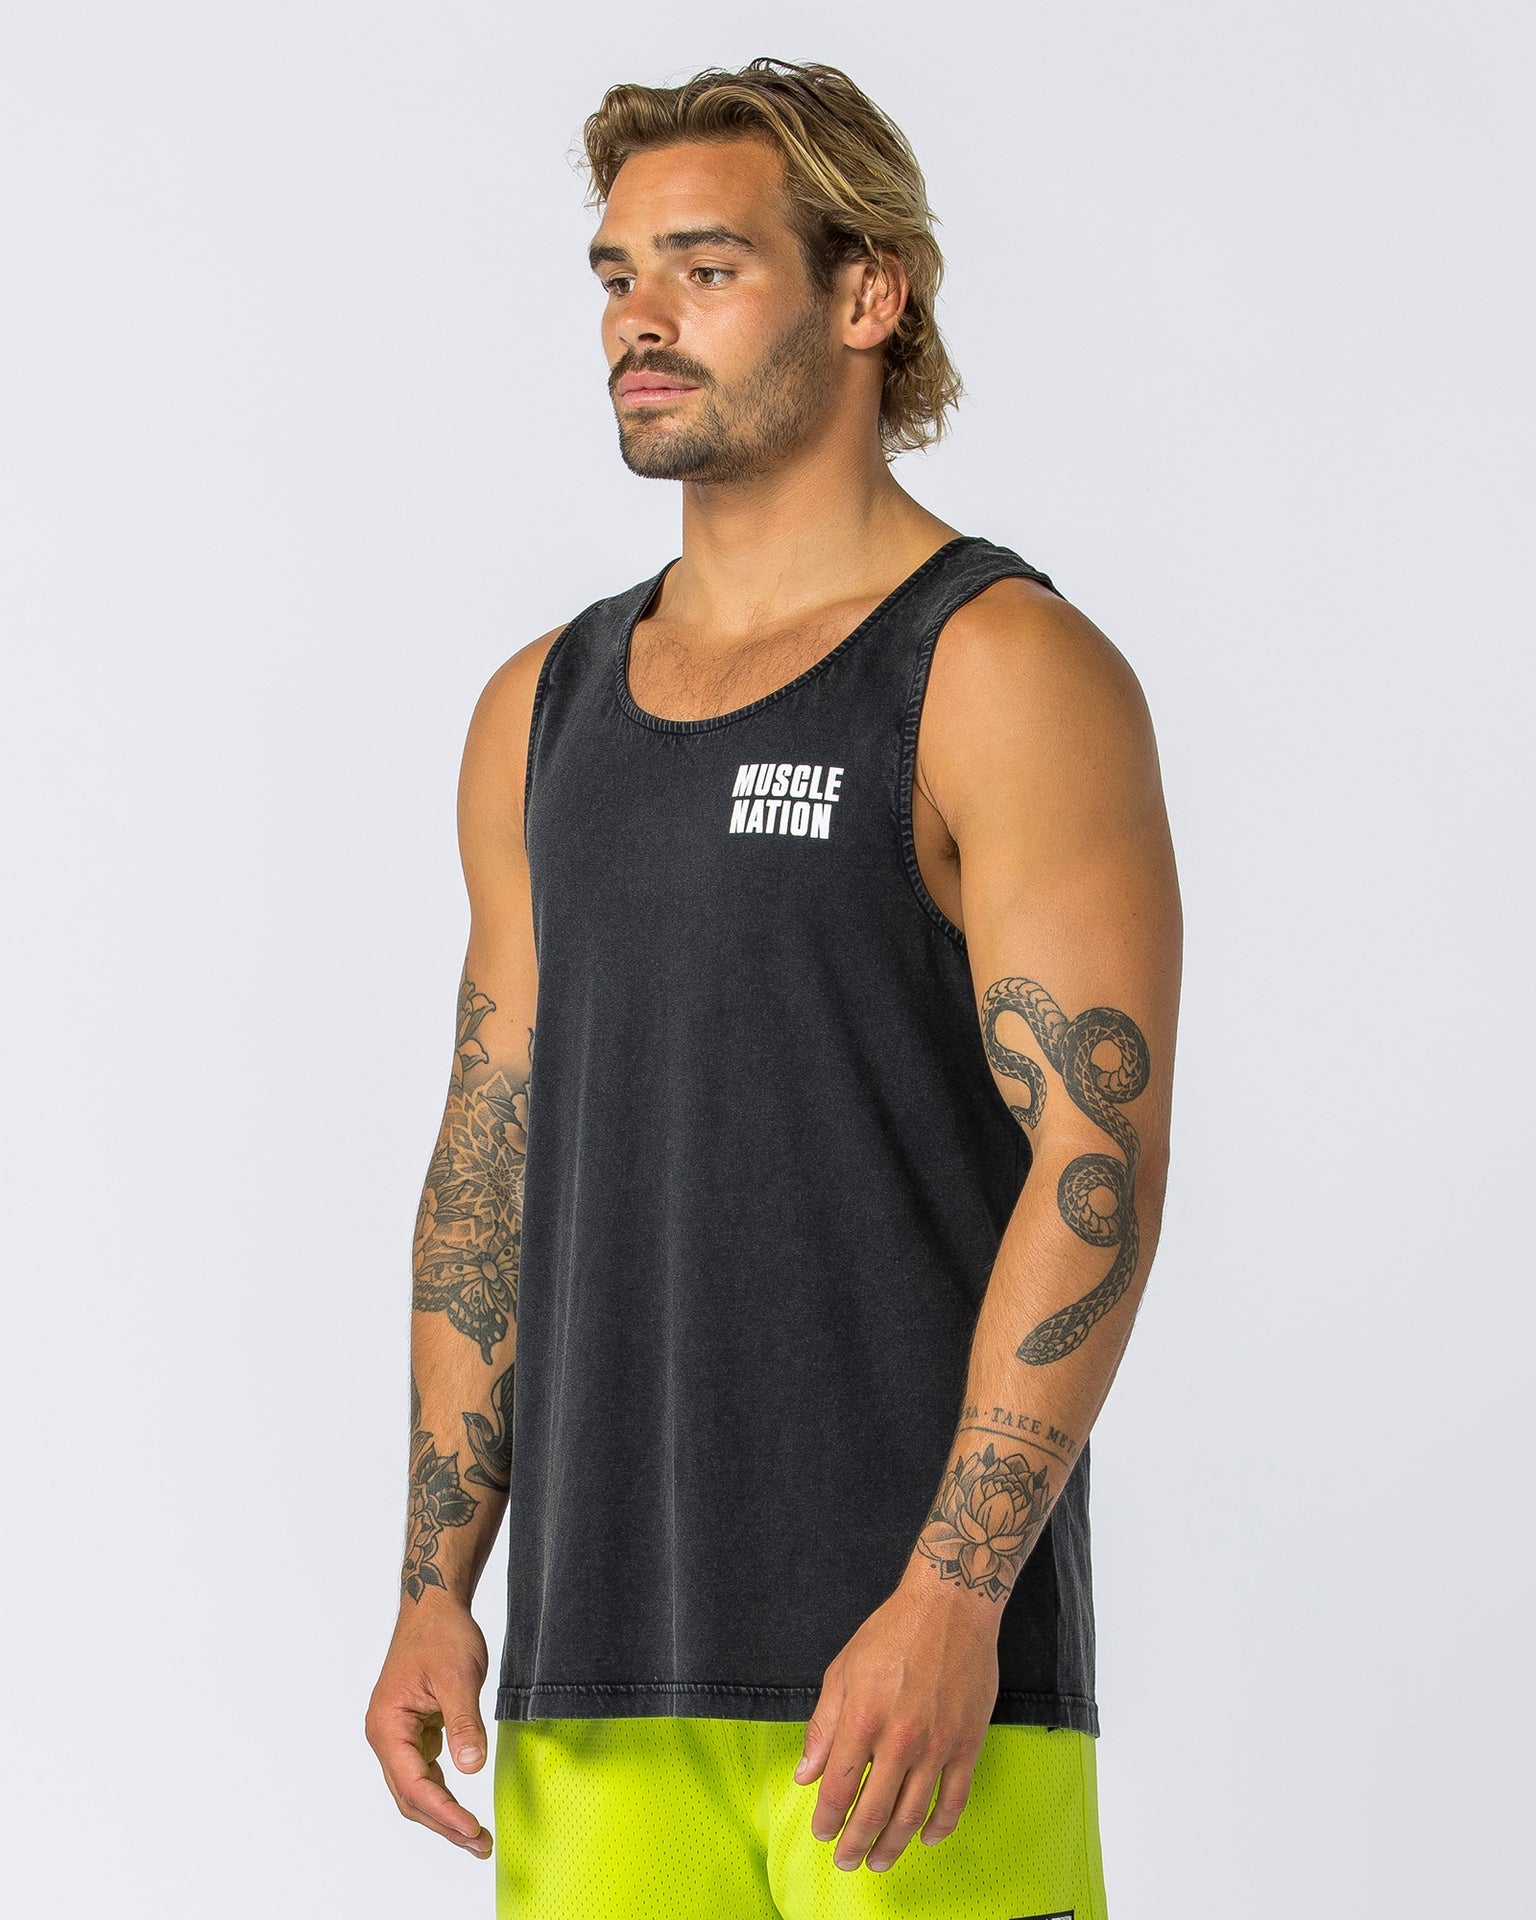 Muscle Nation Tank Tops Copy of Box Wave Vintage Tank - Washed Black / Charcoal